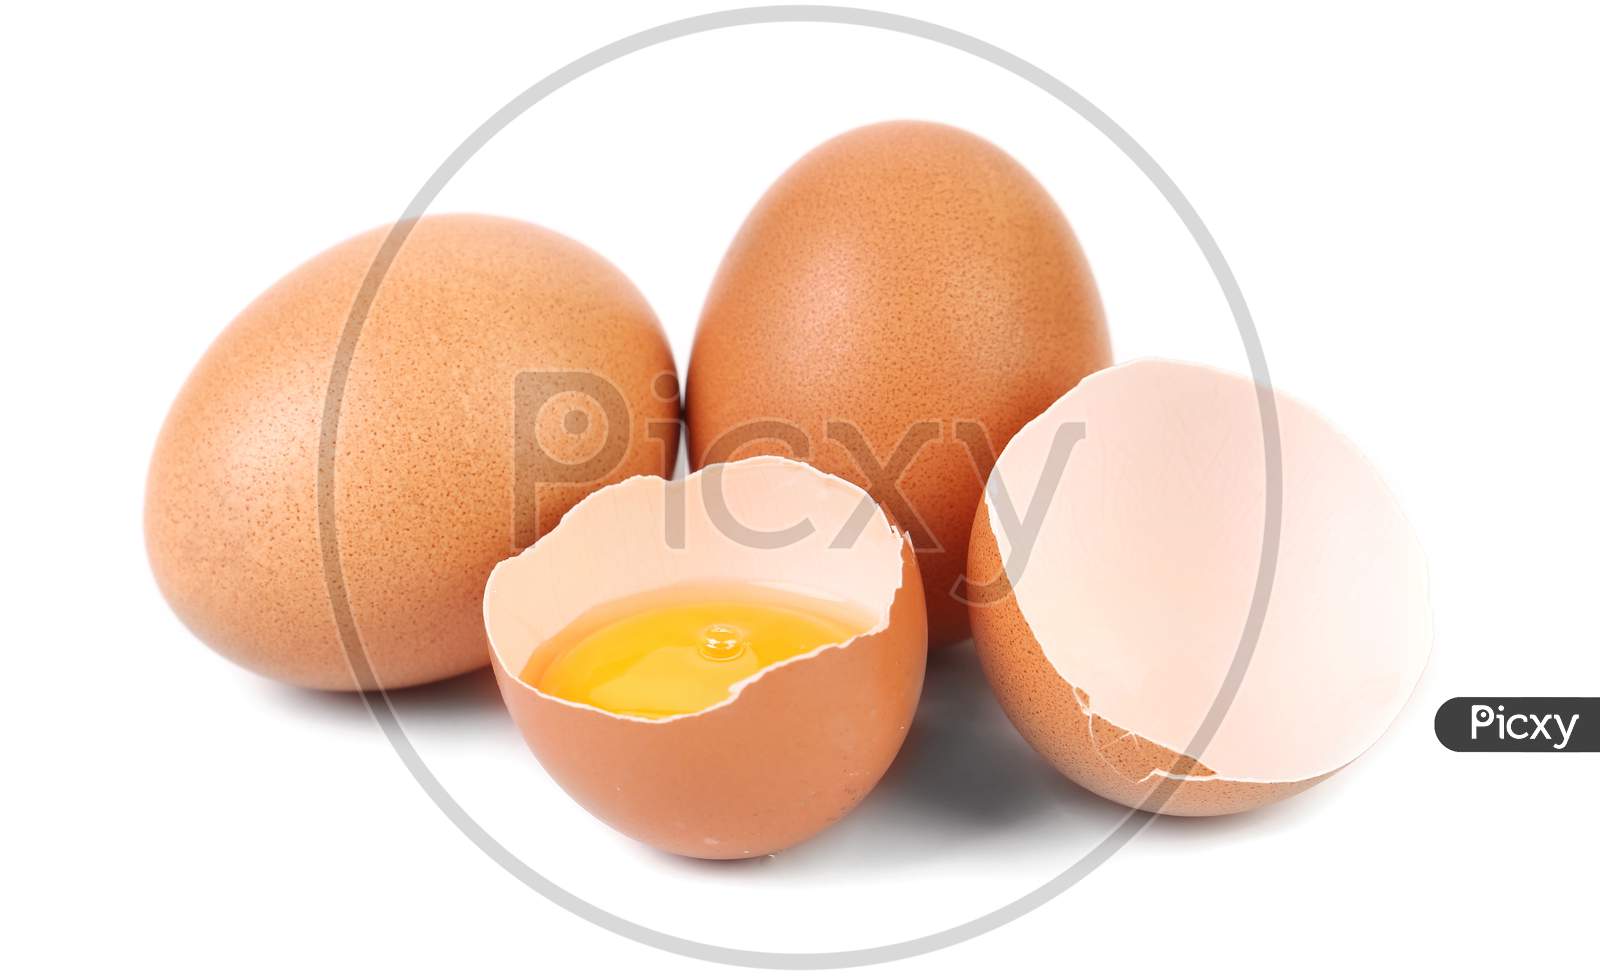 Whole Egg And Broken Egg. Isolated On A White Background.